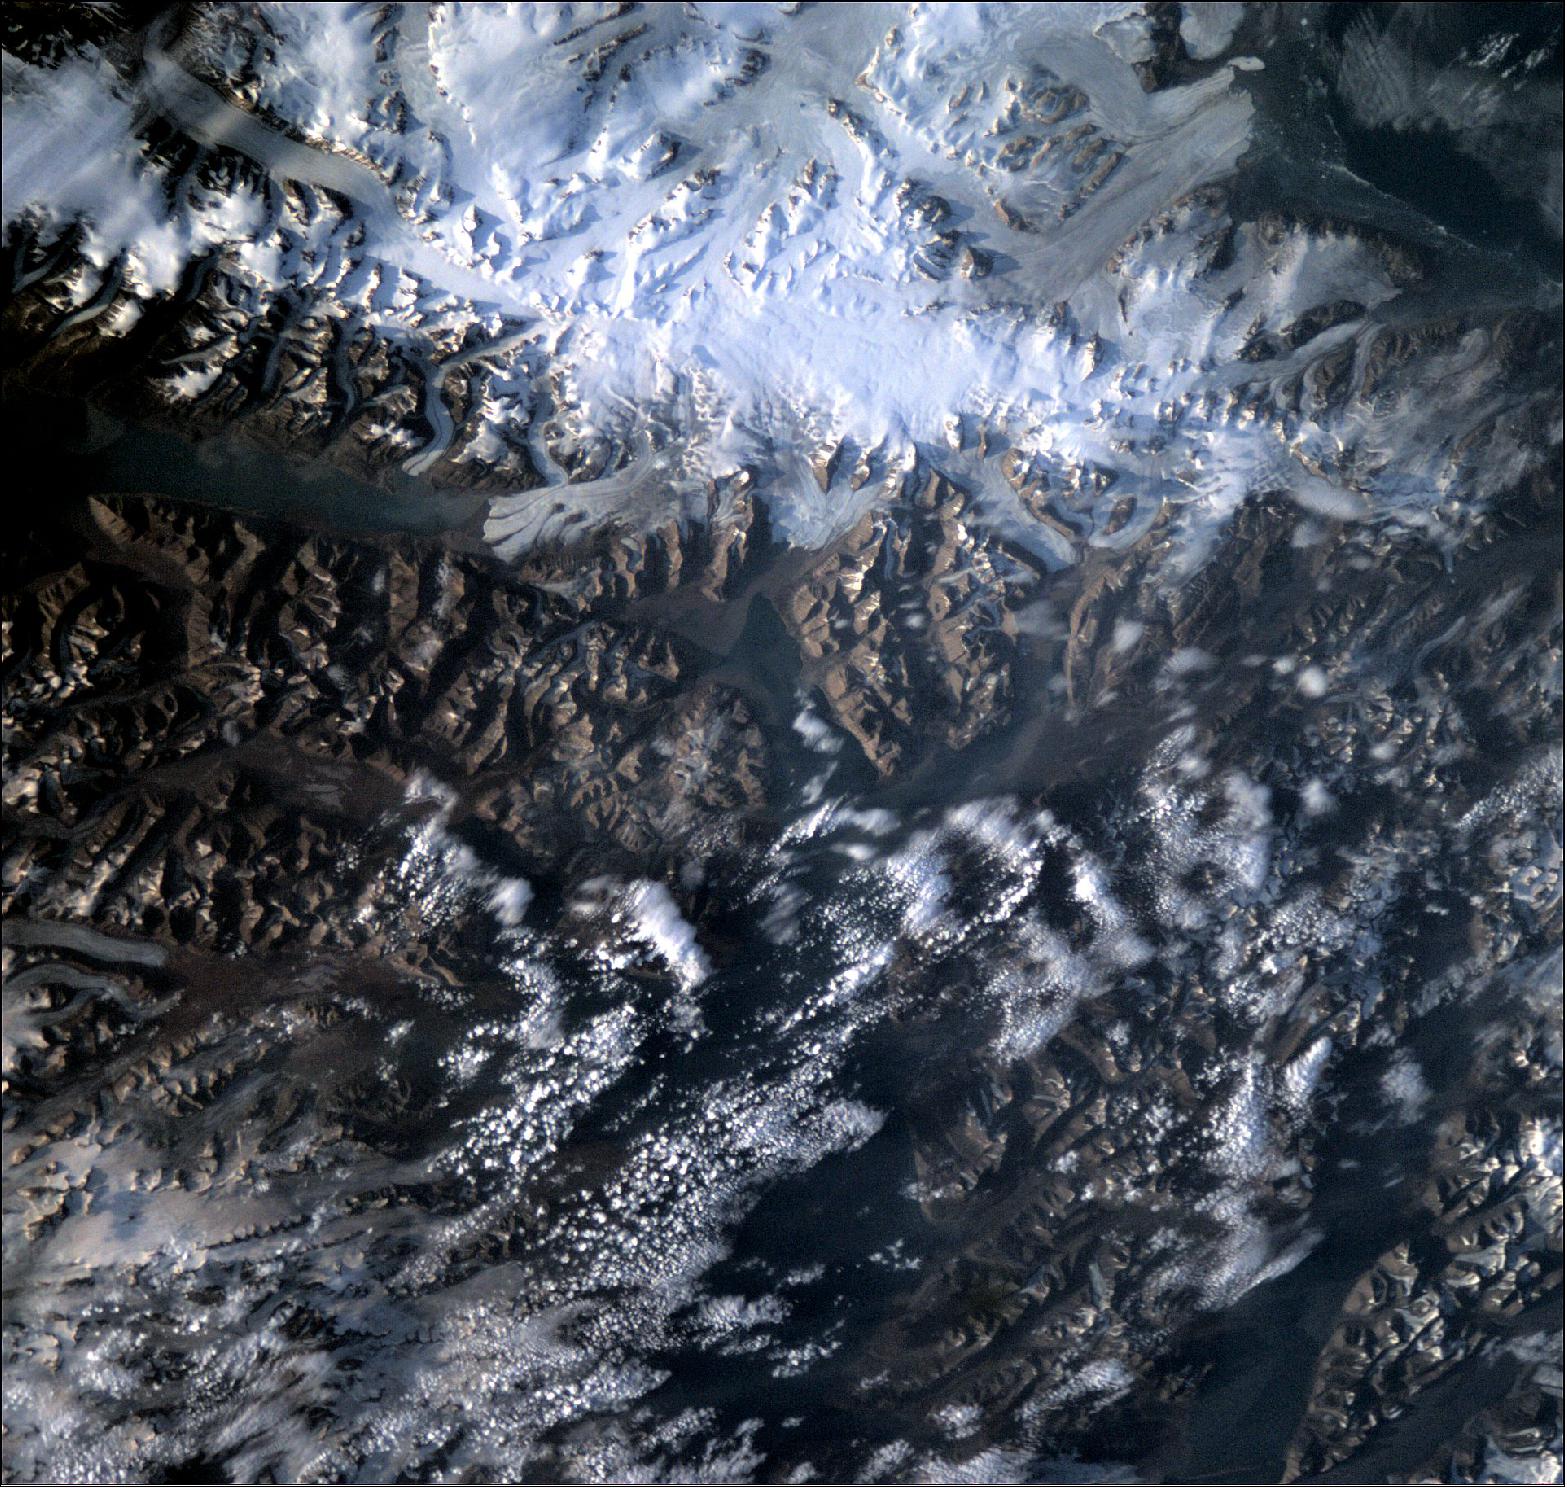 Figure 41: This photo was captured by OPS-SAT, ESA’s space laboratory, as it underwent commissioning of its high-definition camera on 26 July 2020. The rugged, remote terrain is one of the world's northernmost inhabited regions. A Norwegian archipelago in the Arctic Ocean, part way between Norway and the North Pole, Svalbard is made up of glaciers and frozen tundra. The nanosatellite managed to capture the beautiful detail of this unique region, including the long, horizontal body of water at the top-left of the image, the notorious 32 km long Austfjorden fjord of Svalbard (image credit: ESA) 46)